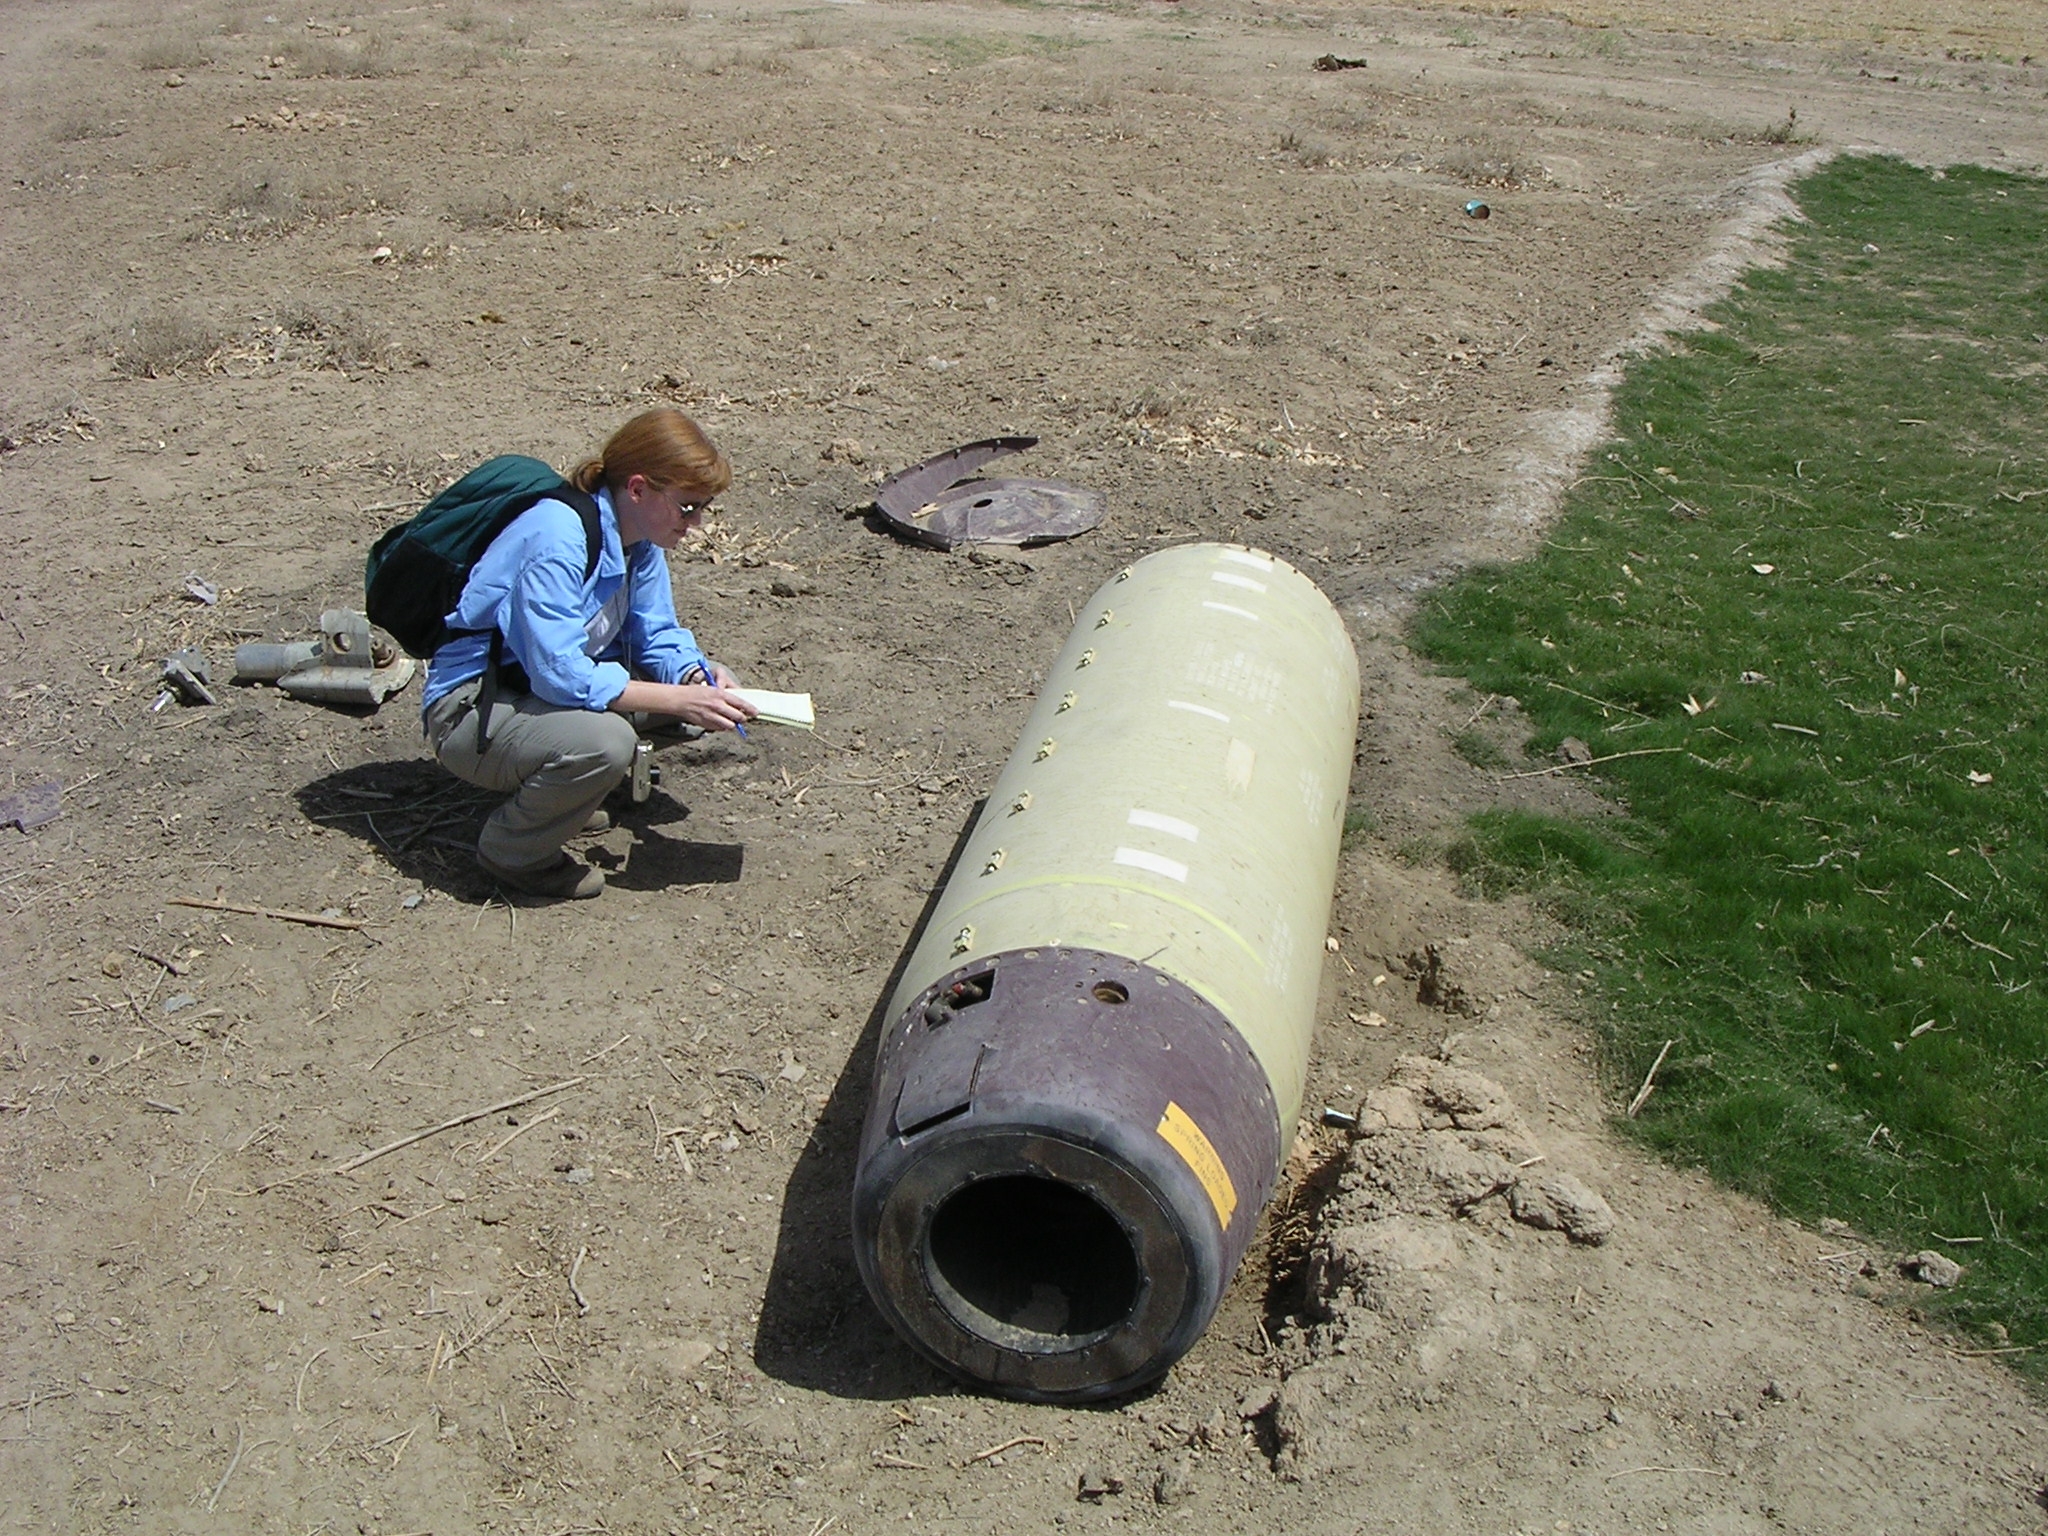 Bonnie examines a cluster munition in the dirt in Iraq. She bends down with a piece of paper.